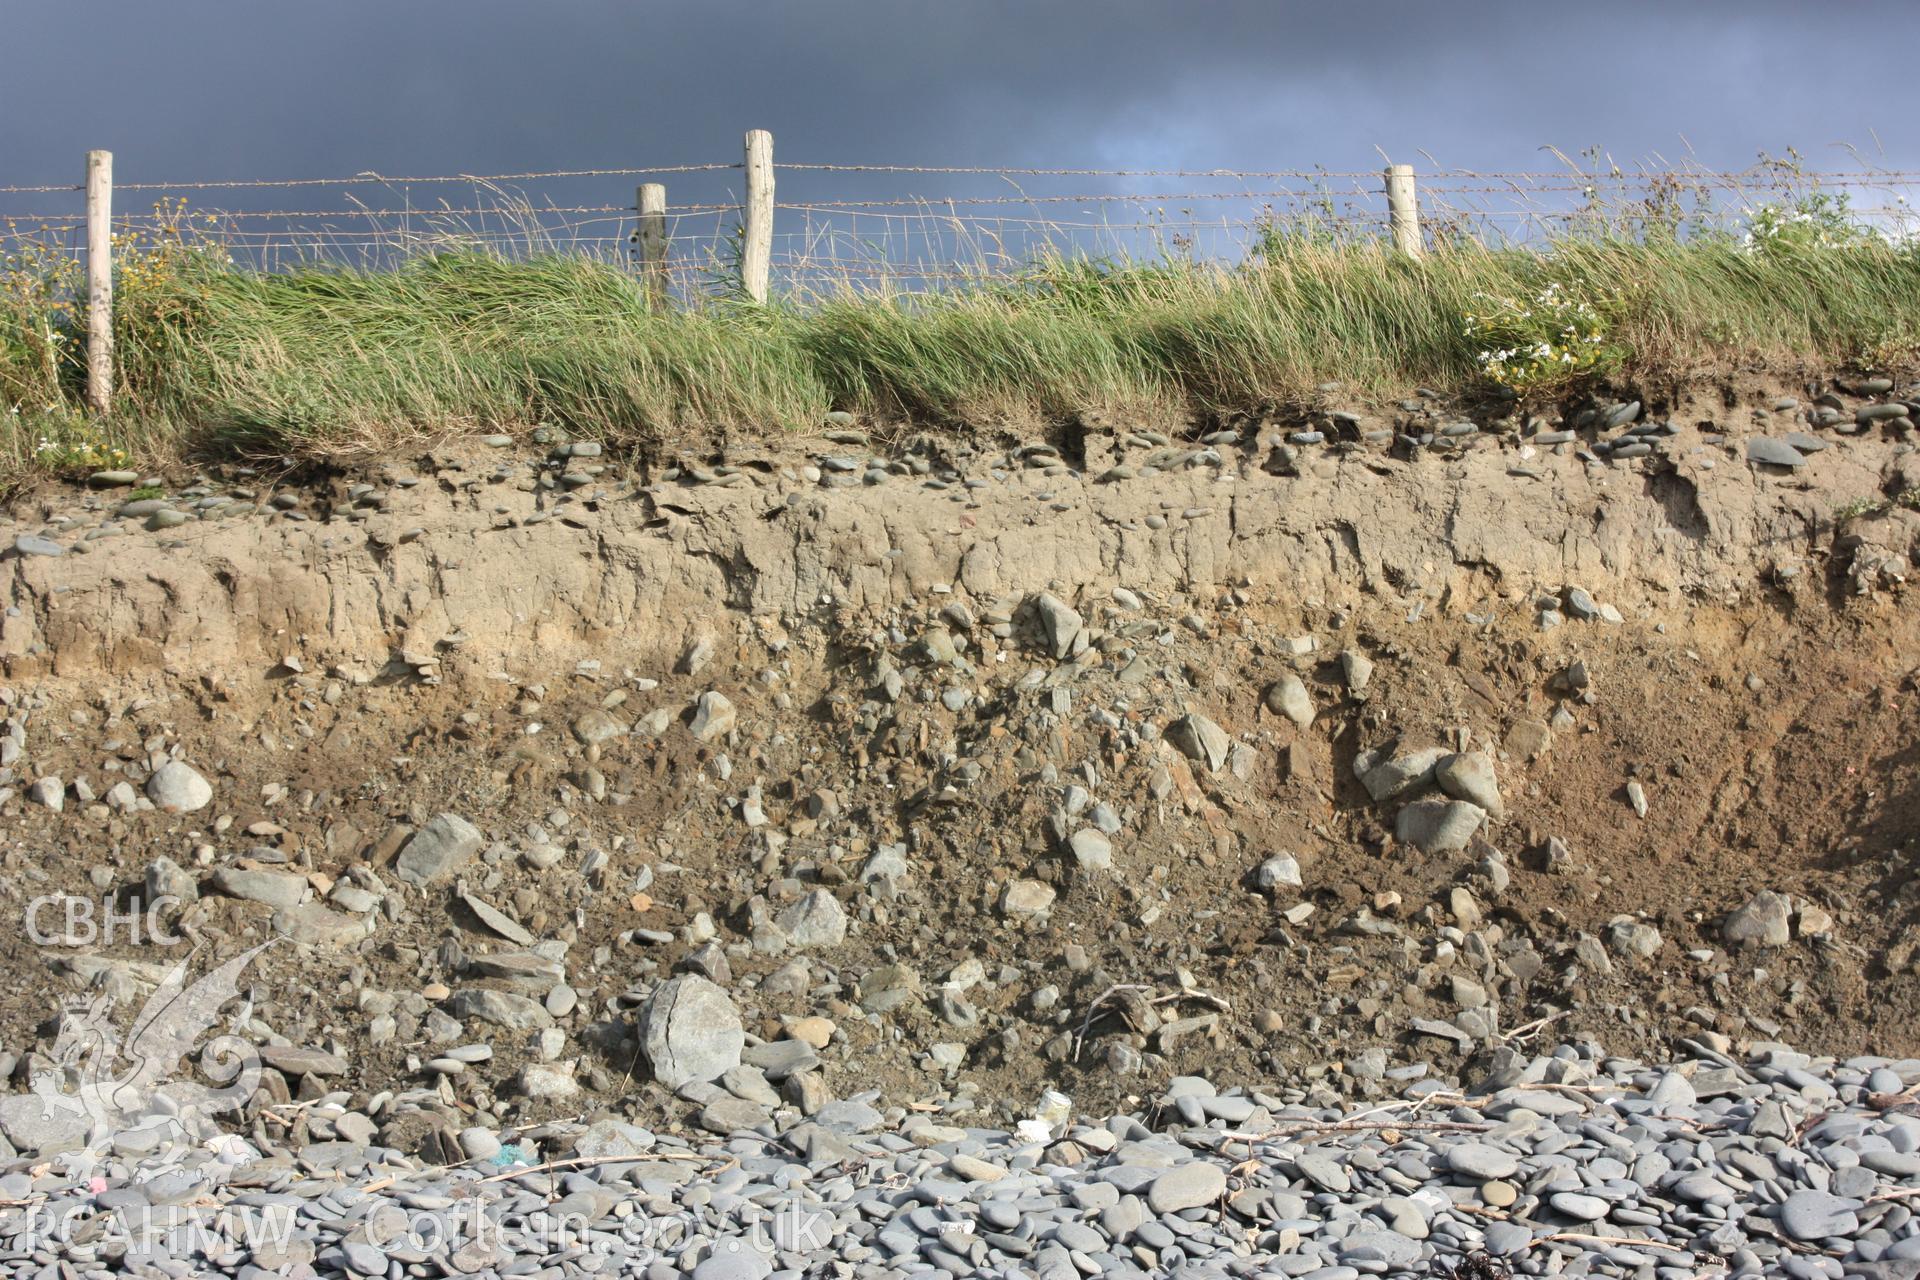 Cross-section of the stratigraphy of the soft cliffs which begin to rise just to the south of the site.